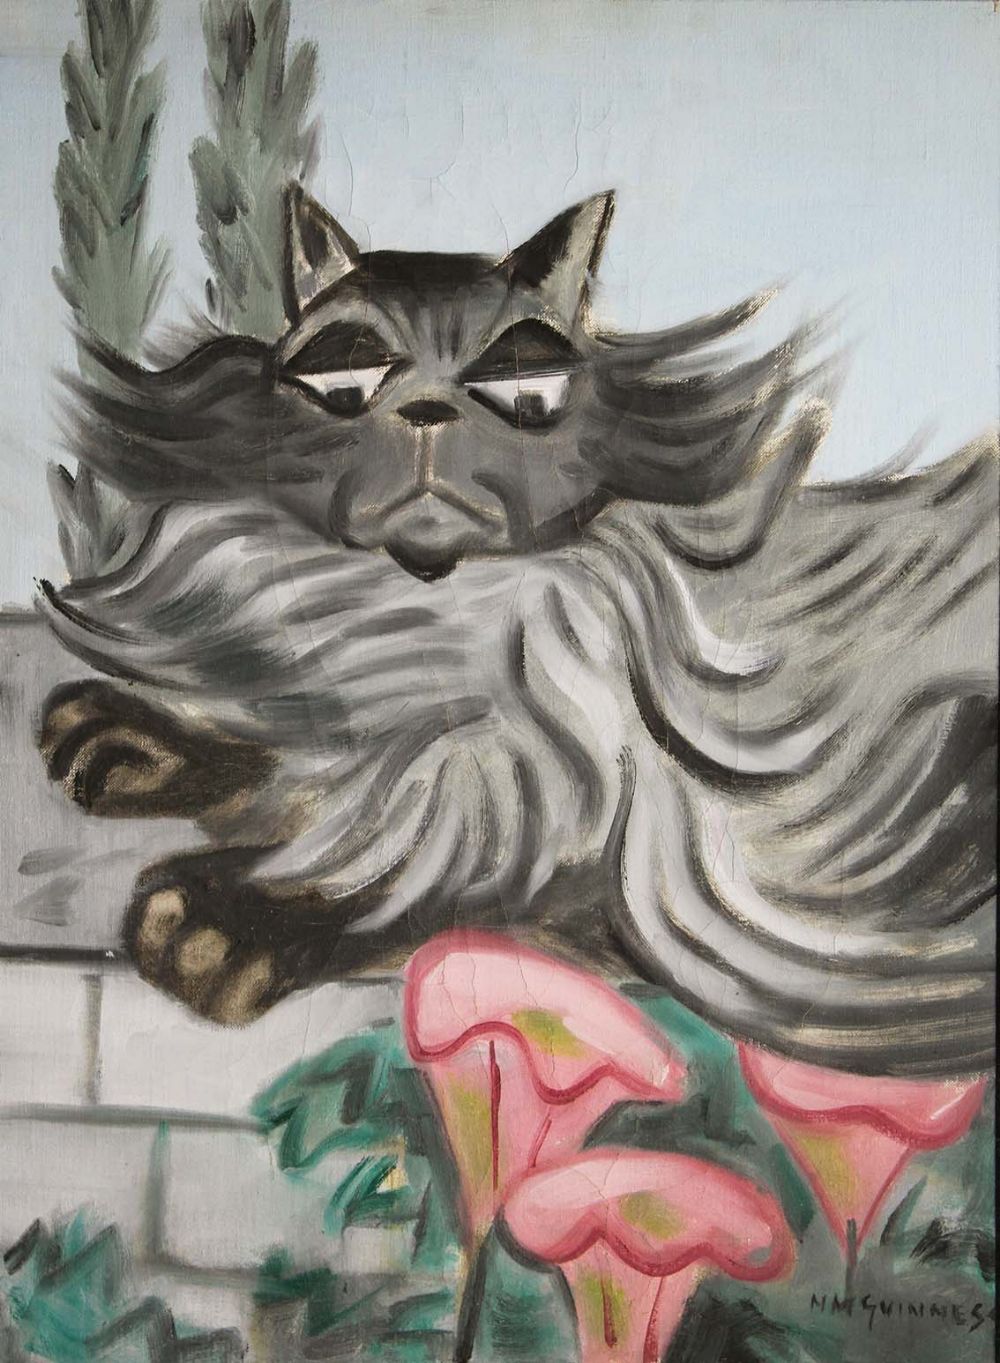 Lot 78 - CAT by Norah McGuinness